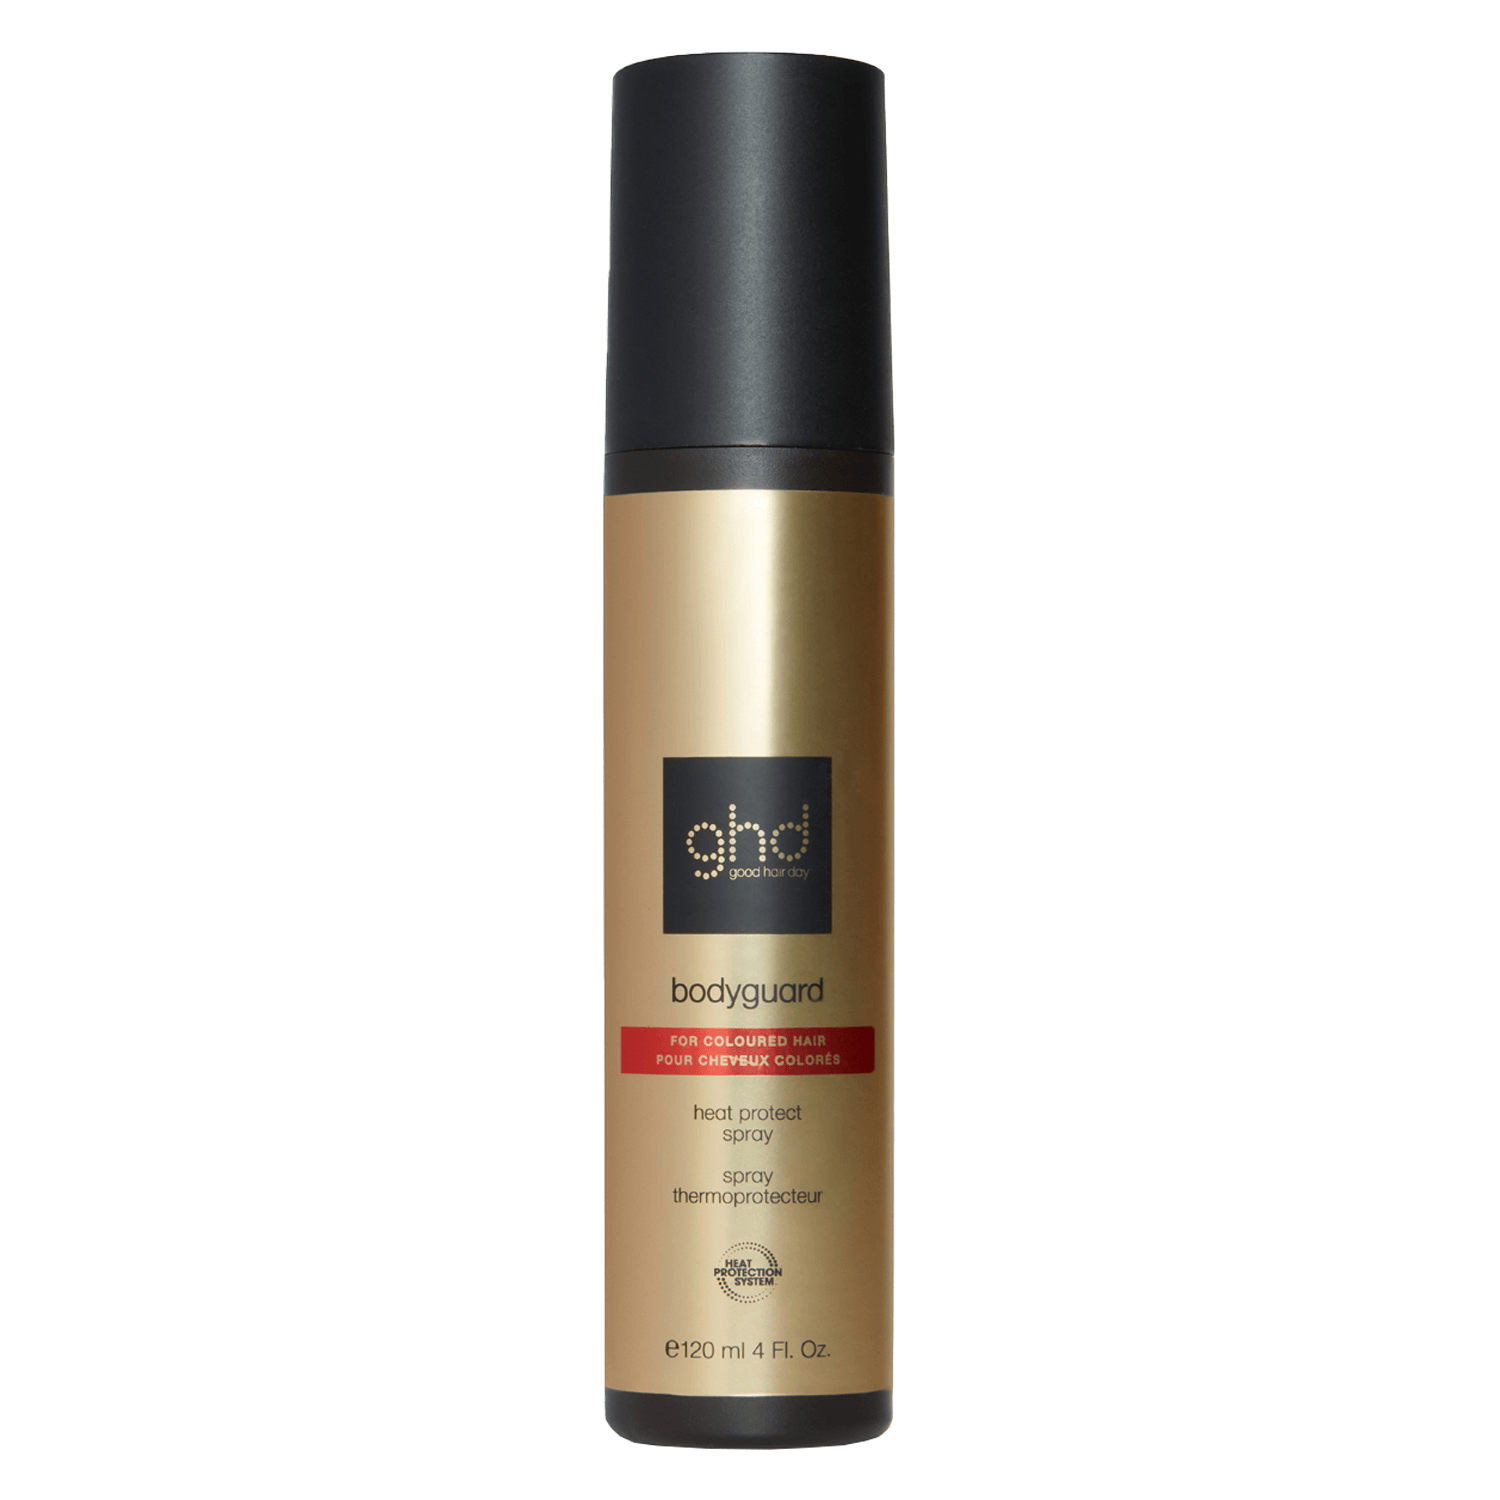 Produktbild von ghd Heat Protection Styling System - Bodyguard Heat Protect Spray for Coloured Hair